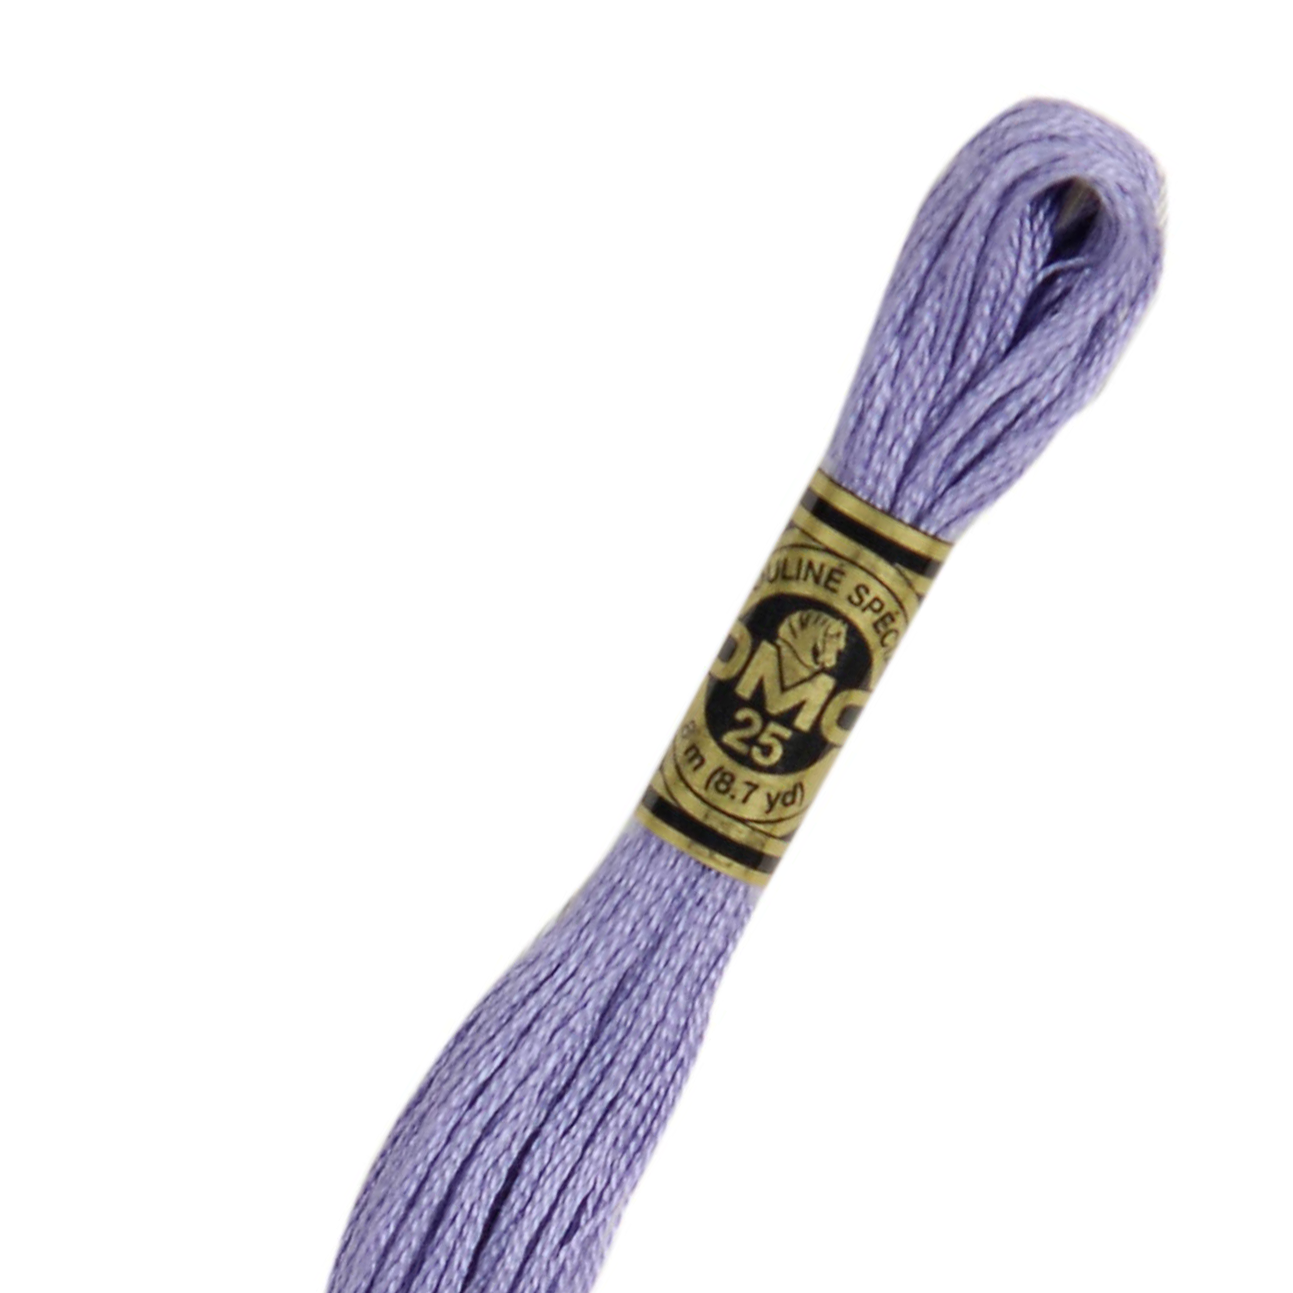 DMC 31 Cotton Embroidery Floss - Stitched Modern